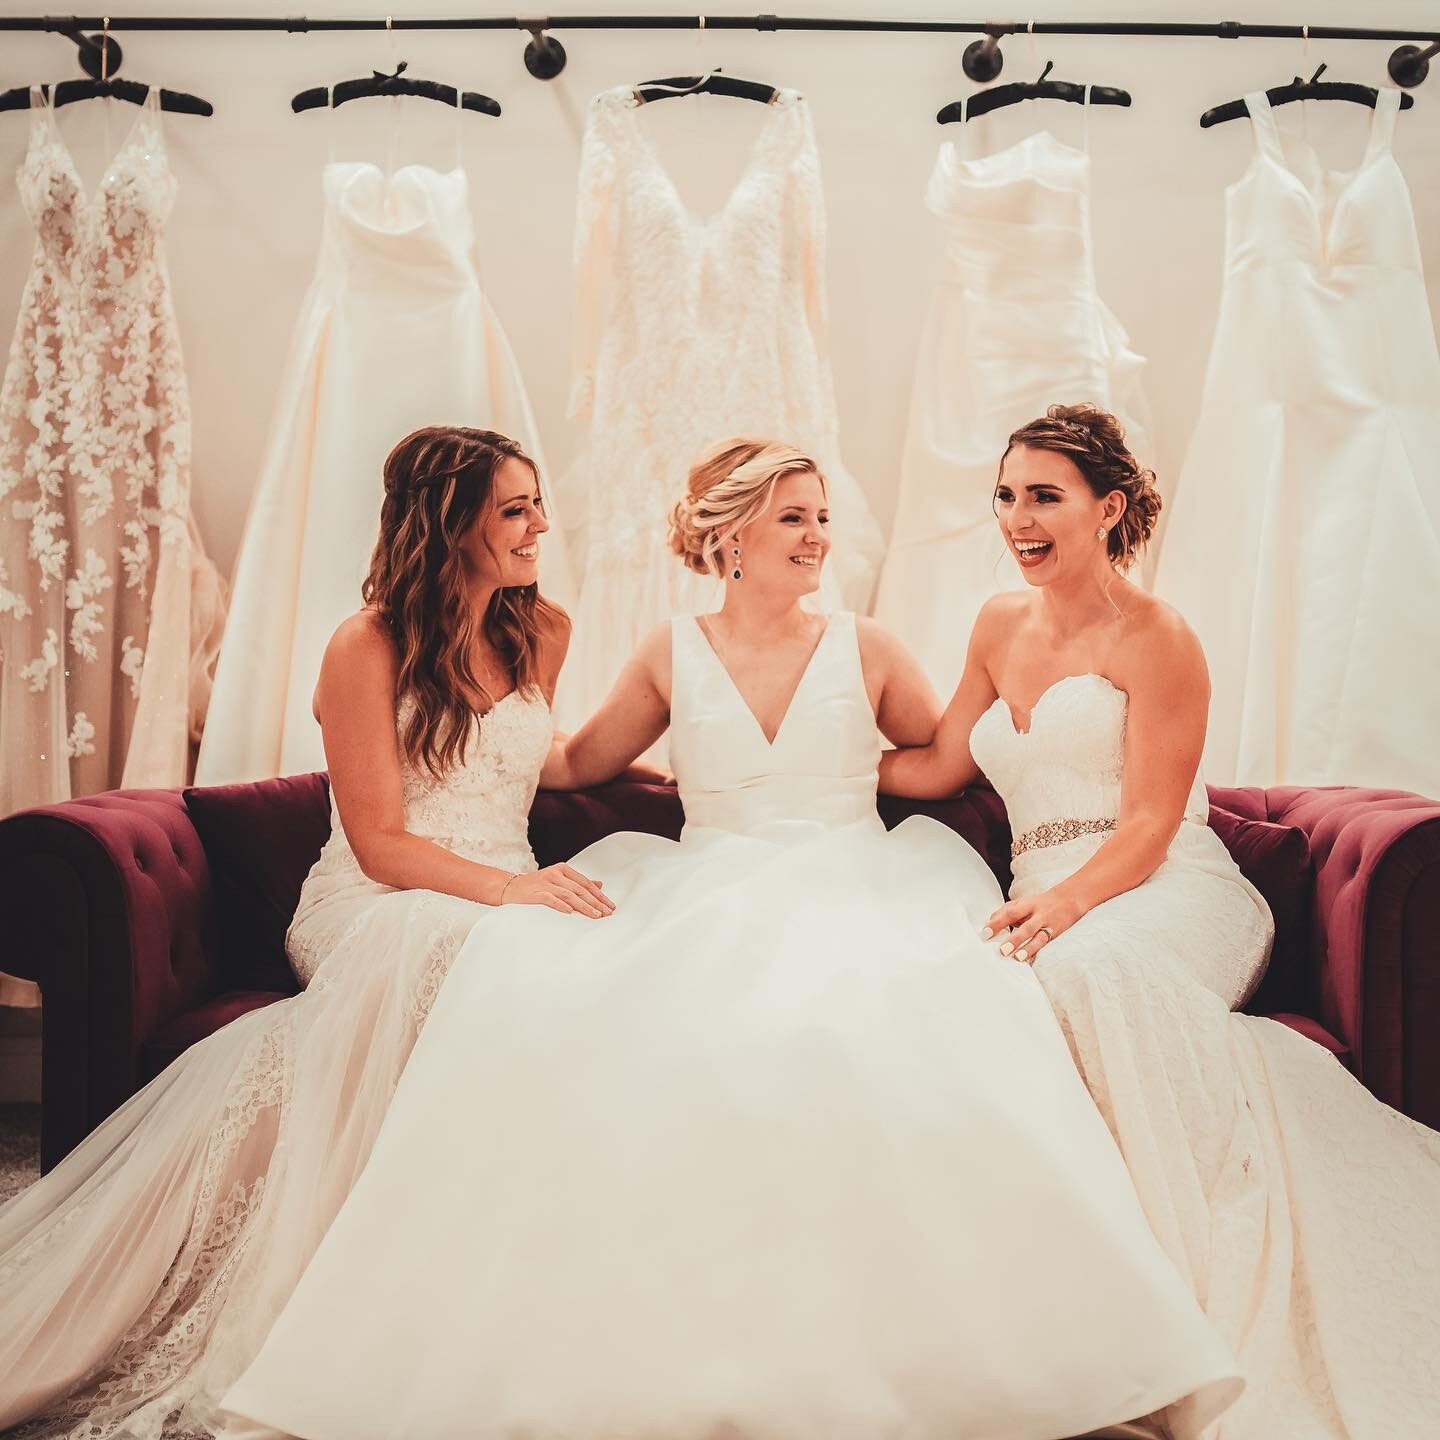 This week&rsquo;s #VendorSpotlight @sydneysbridal in West Union. Talk about finding the perfect dress.. And even more exciting is that she&rsquo;s adding stuff to the collection all the time! 
&bull;
Sydney is so passionate about making sure you find